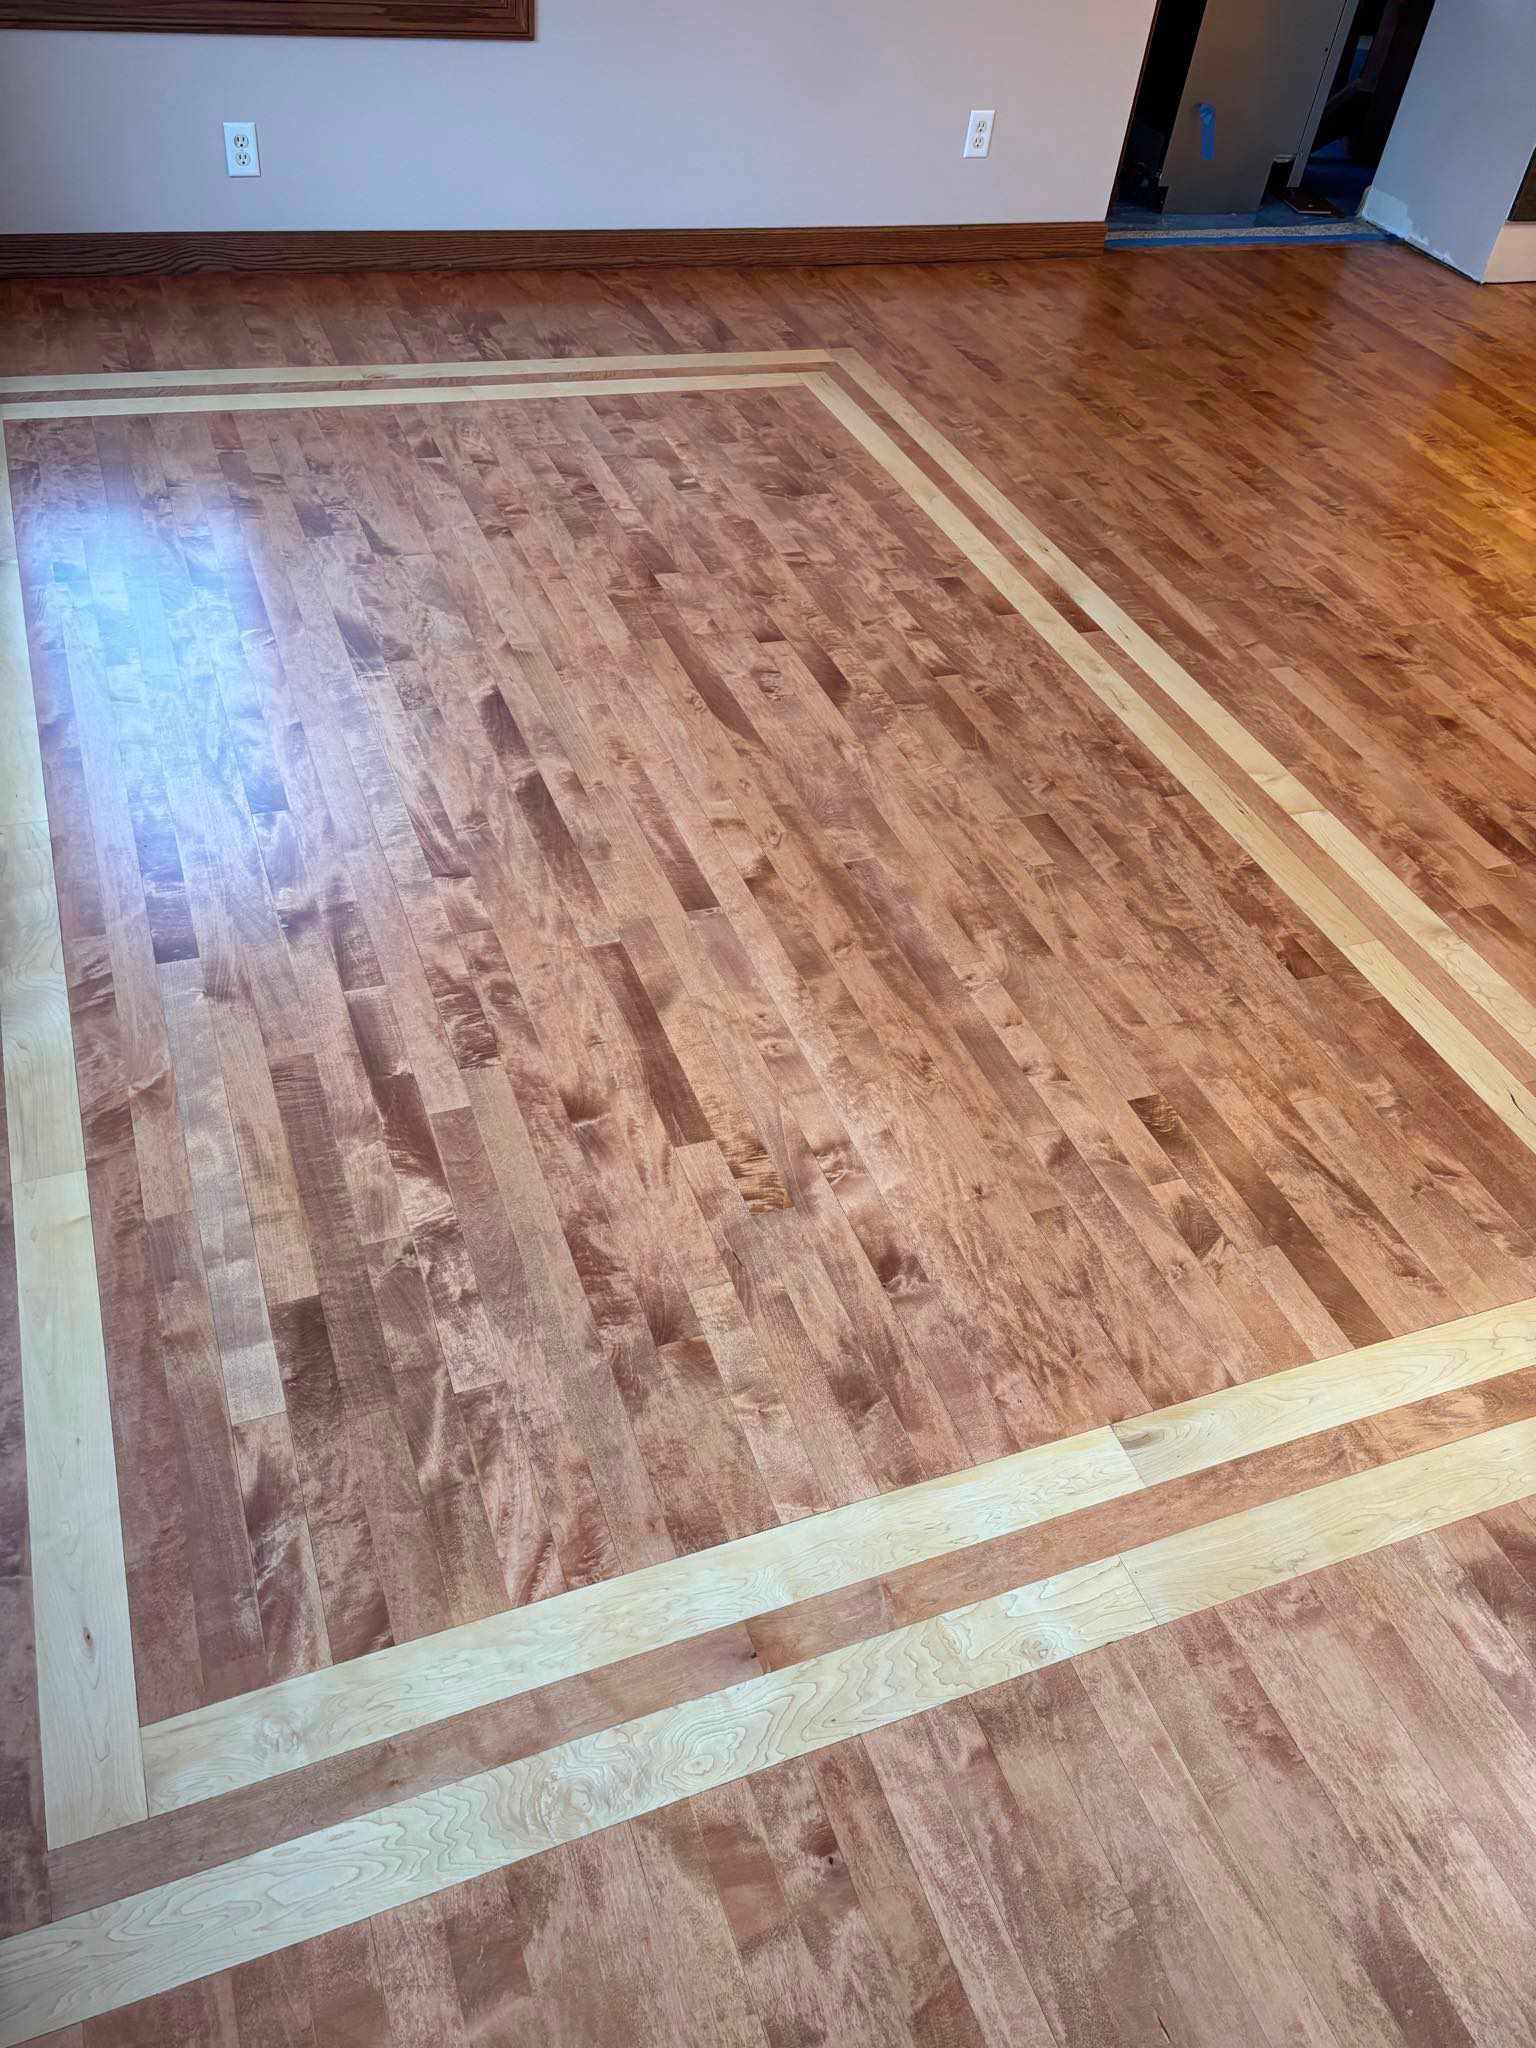 Image of multicolour hardwood floor.   You can see a light brown hardwood floor with a lighter square outline of hardwood planks. 